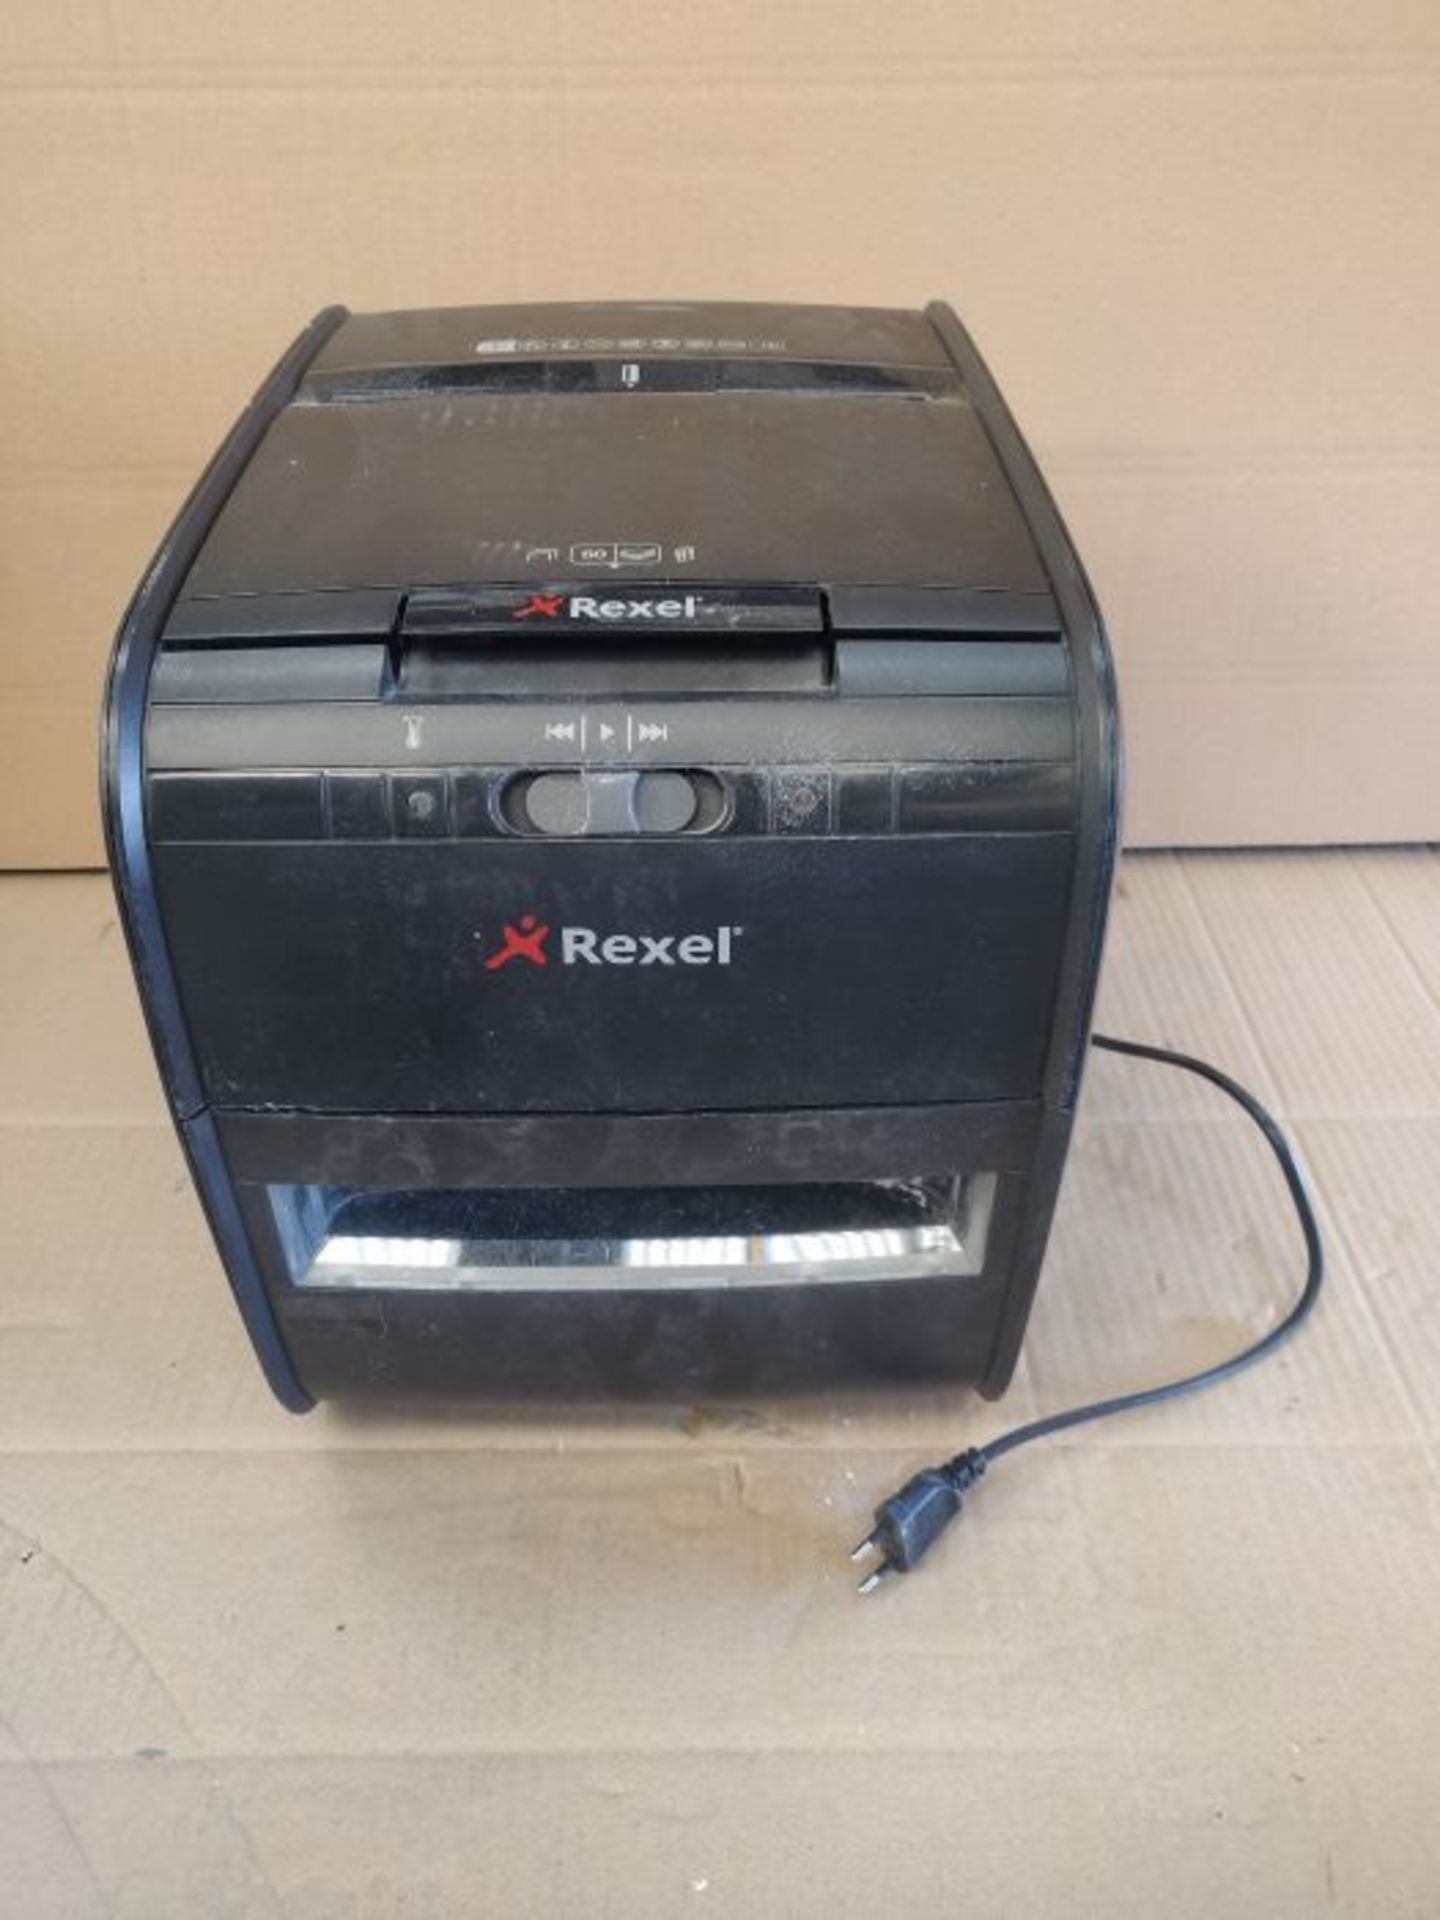 RRP £109.00 Rexel Auto+ 60X Auto Feed 30 Sheet Cross Cut Paper Shredder for Home or Home Office (o - Image 2 of 2